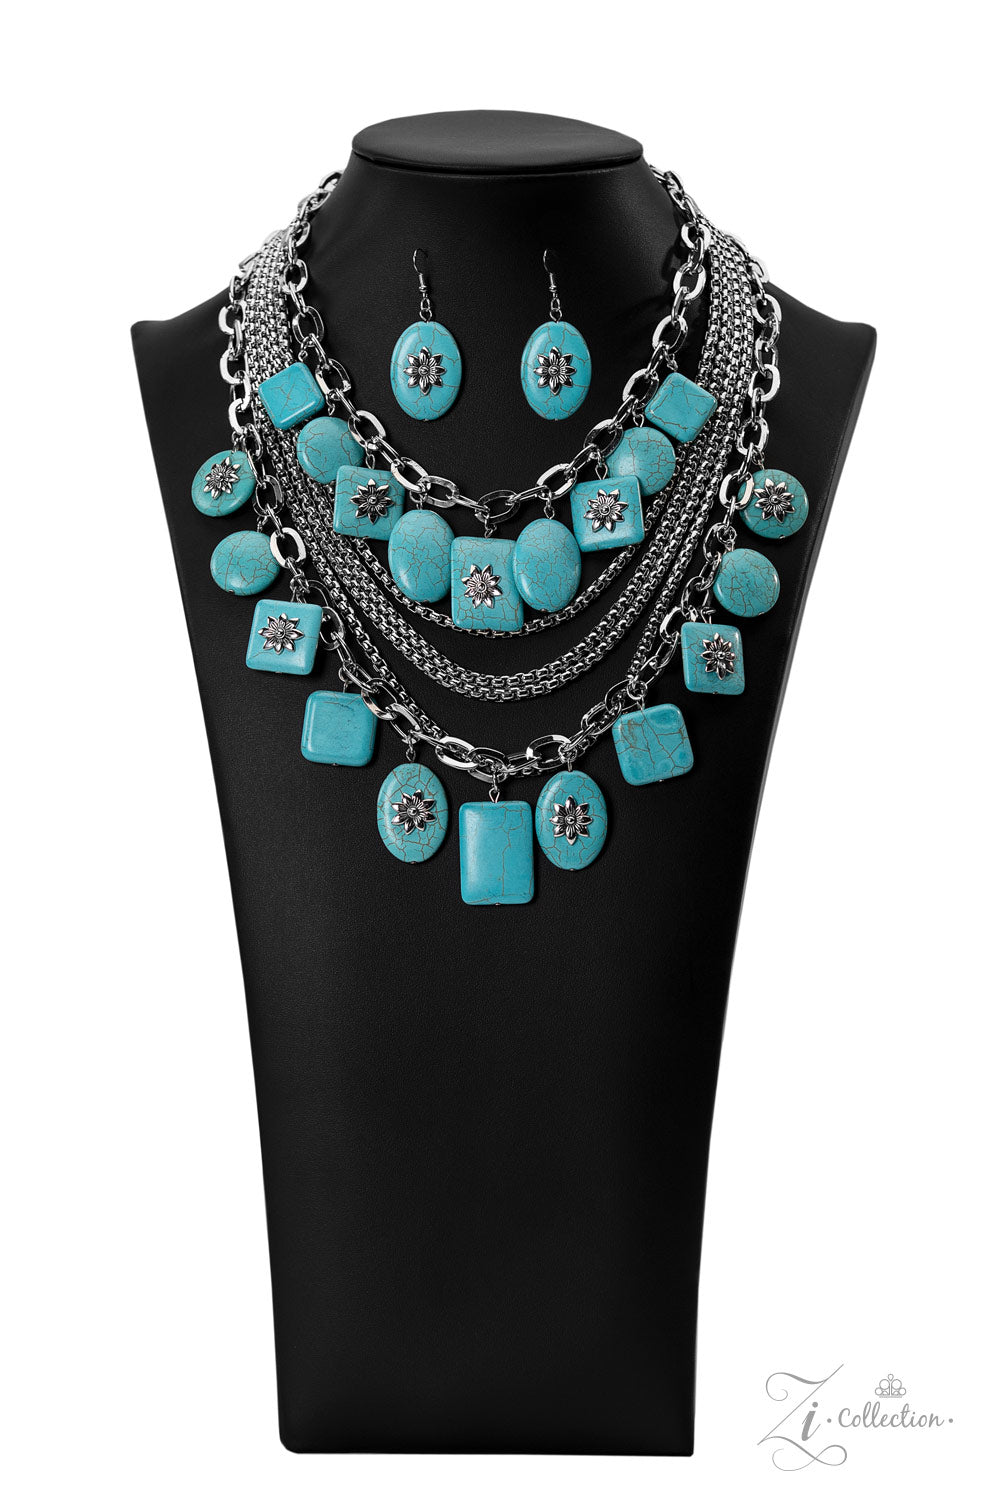 Strands of oversized silver chain links and rounded box chain in the same metallic sheen, drape into dramatic layers across the chest, creating a boisterous collision of texture. Smooth turquoise stones, chiseled into large, flat squares, circles, and rectangles, dance along the bulky silver chains, bringing vibrant splashes of color to the design. Finally, floral appliqués in an antiqued silver finish decorate the surfaces of some of the turquoise stones.